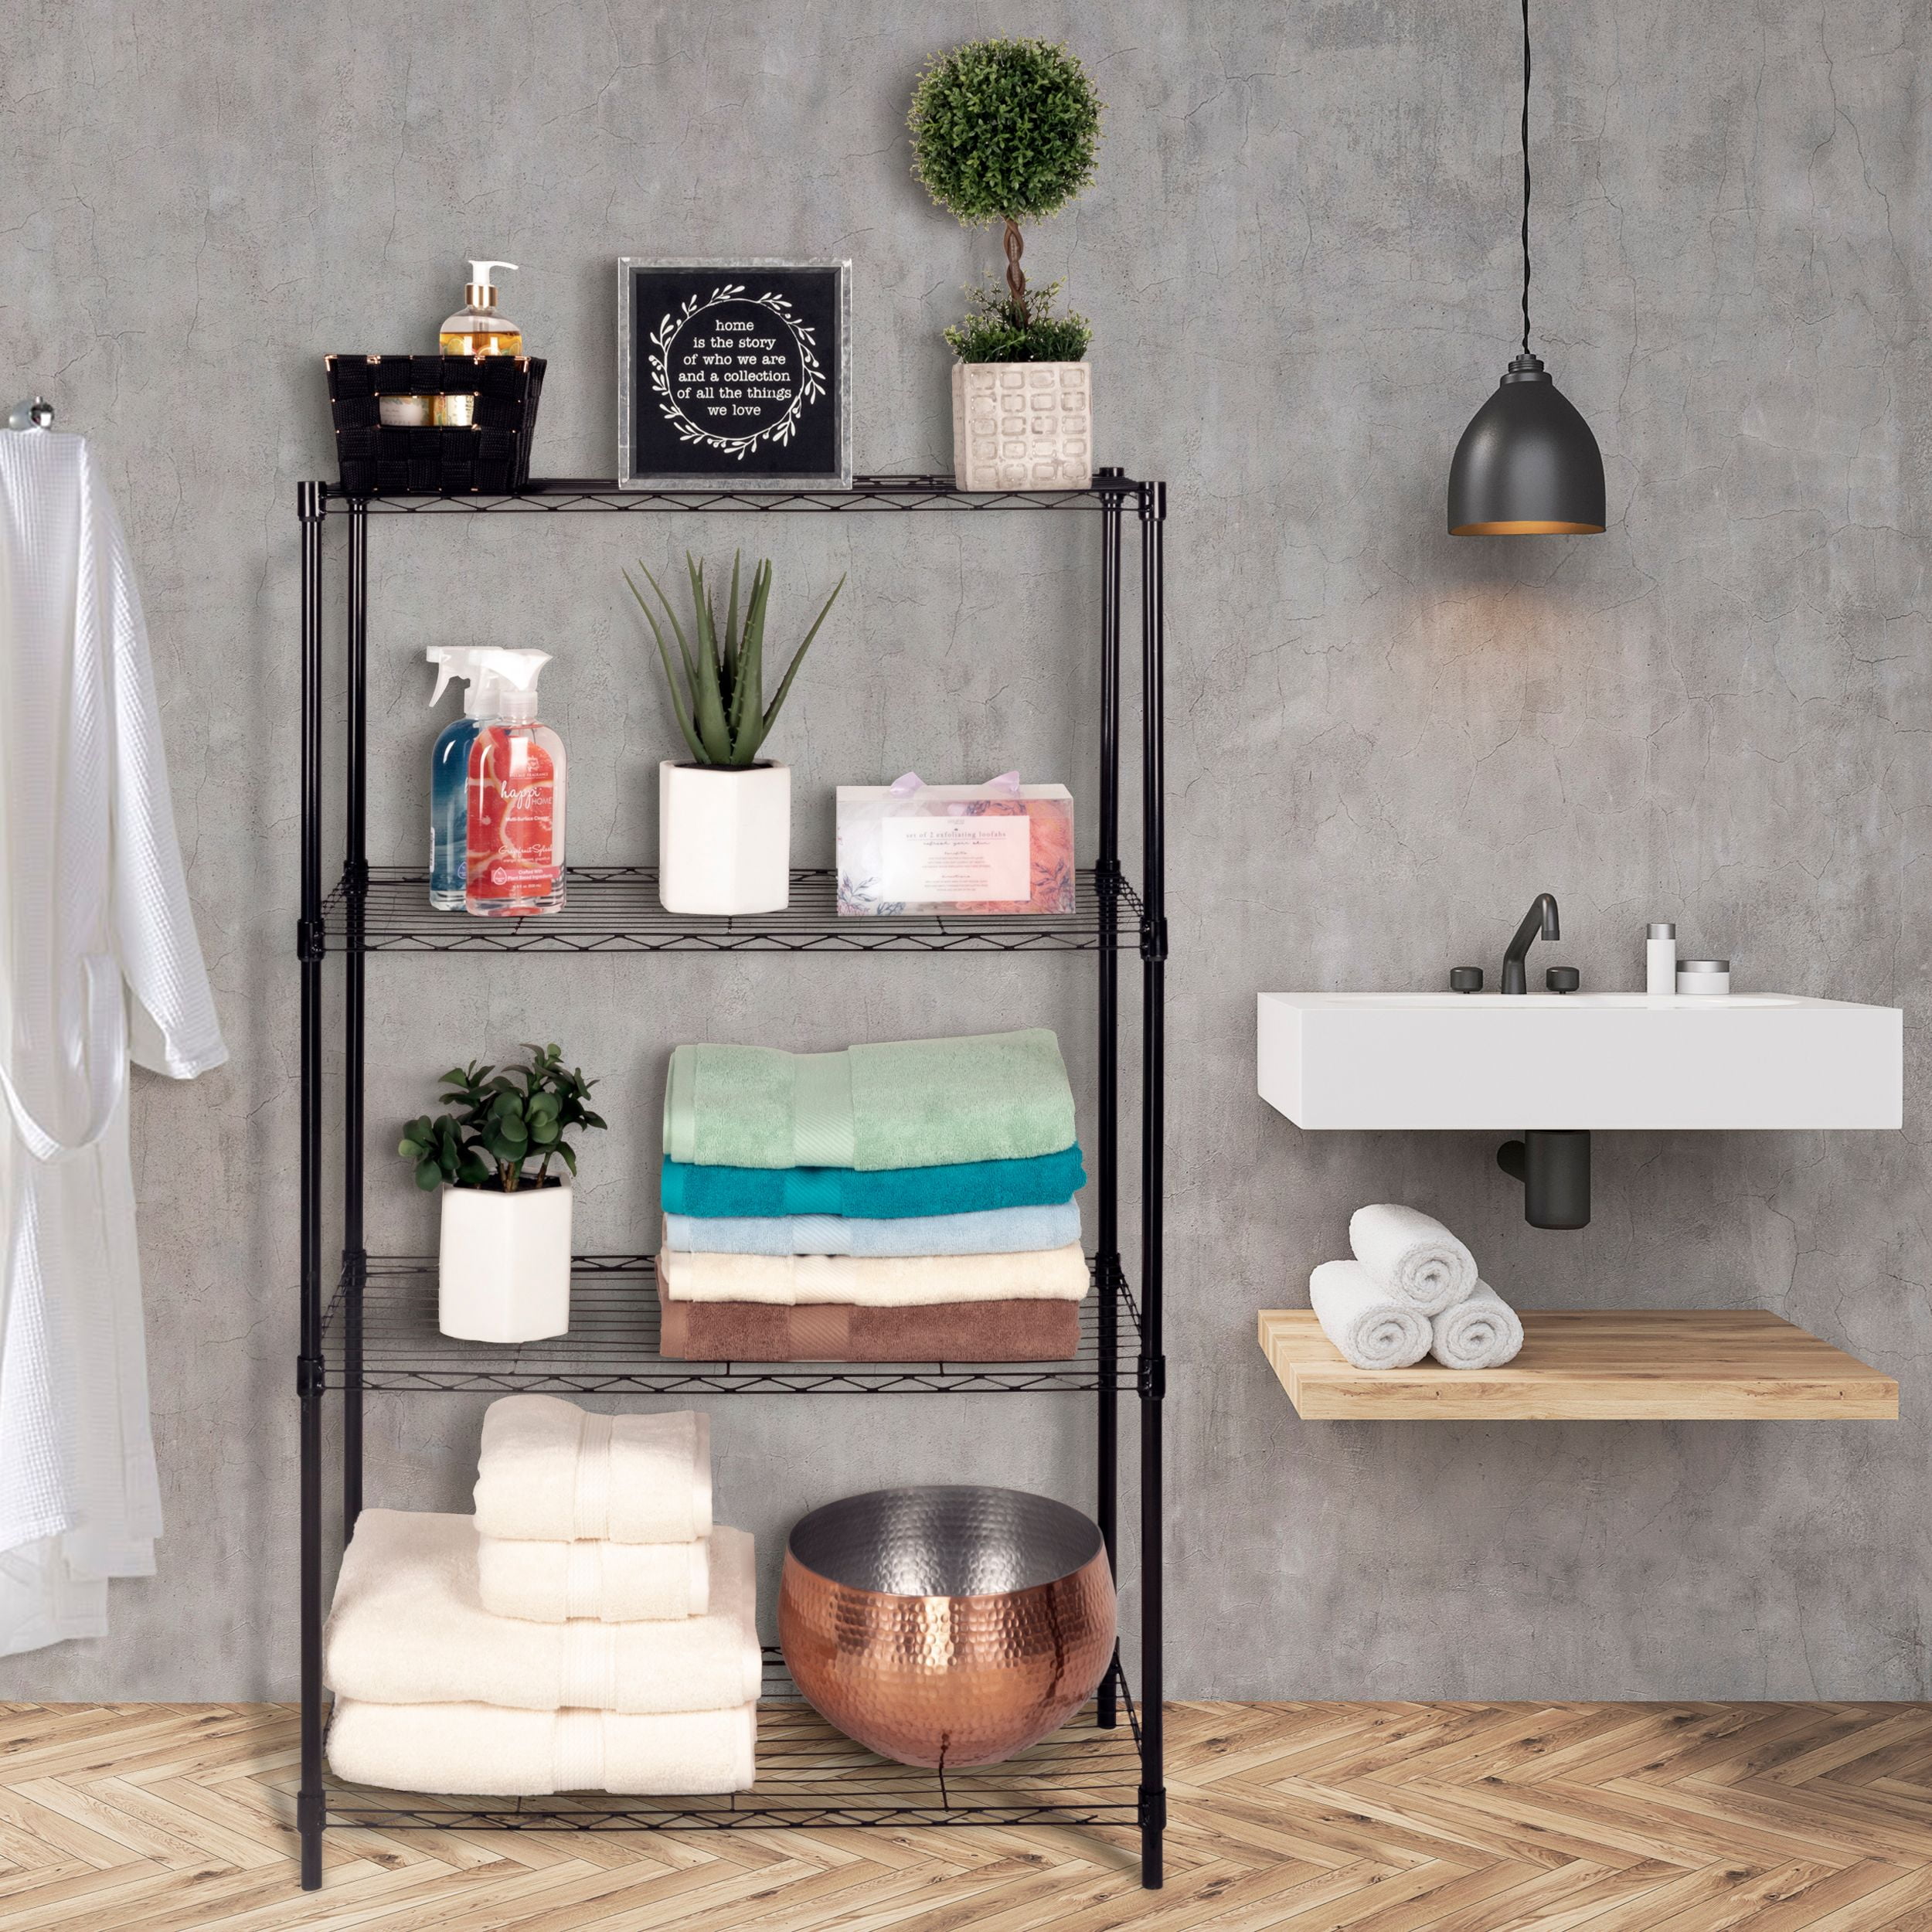 black wire shelving